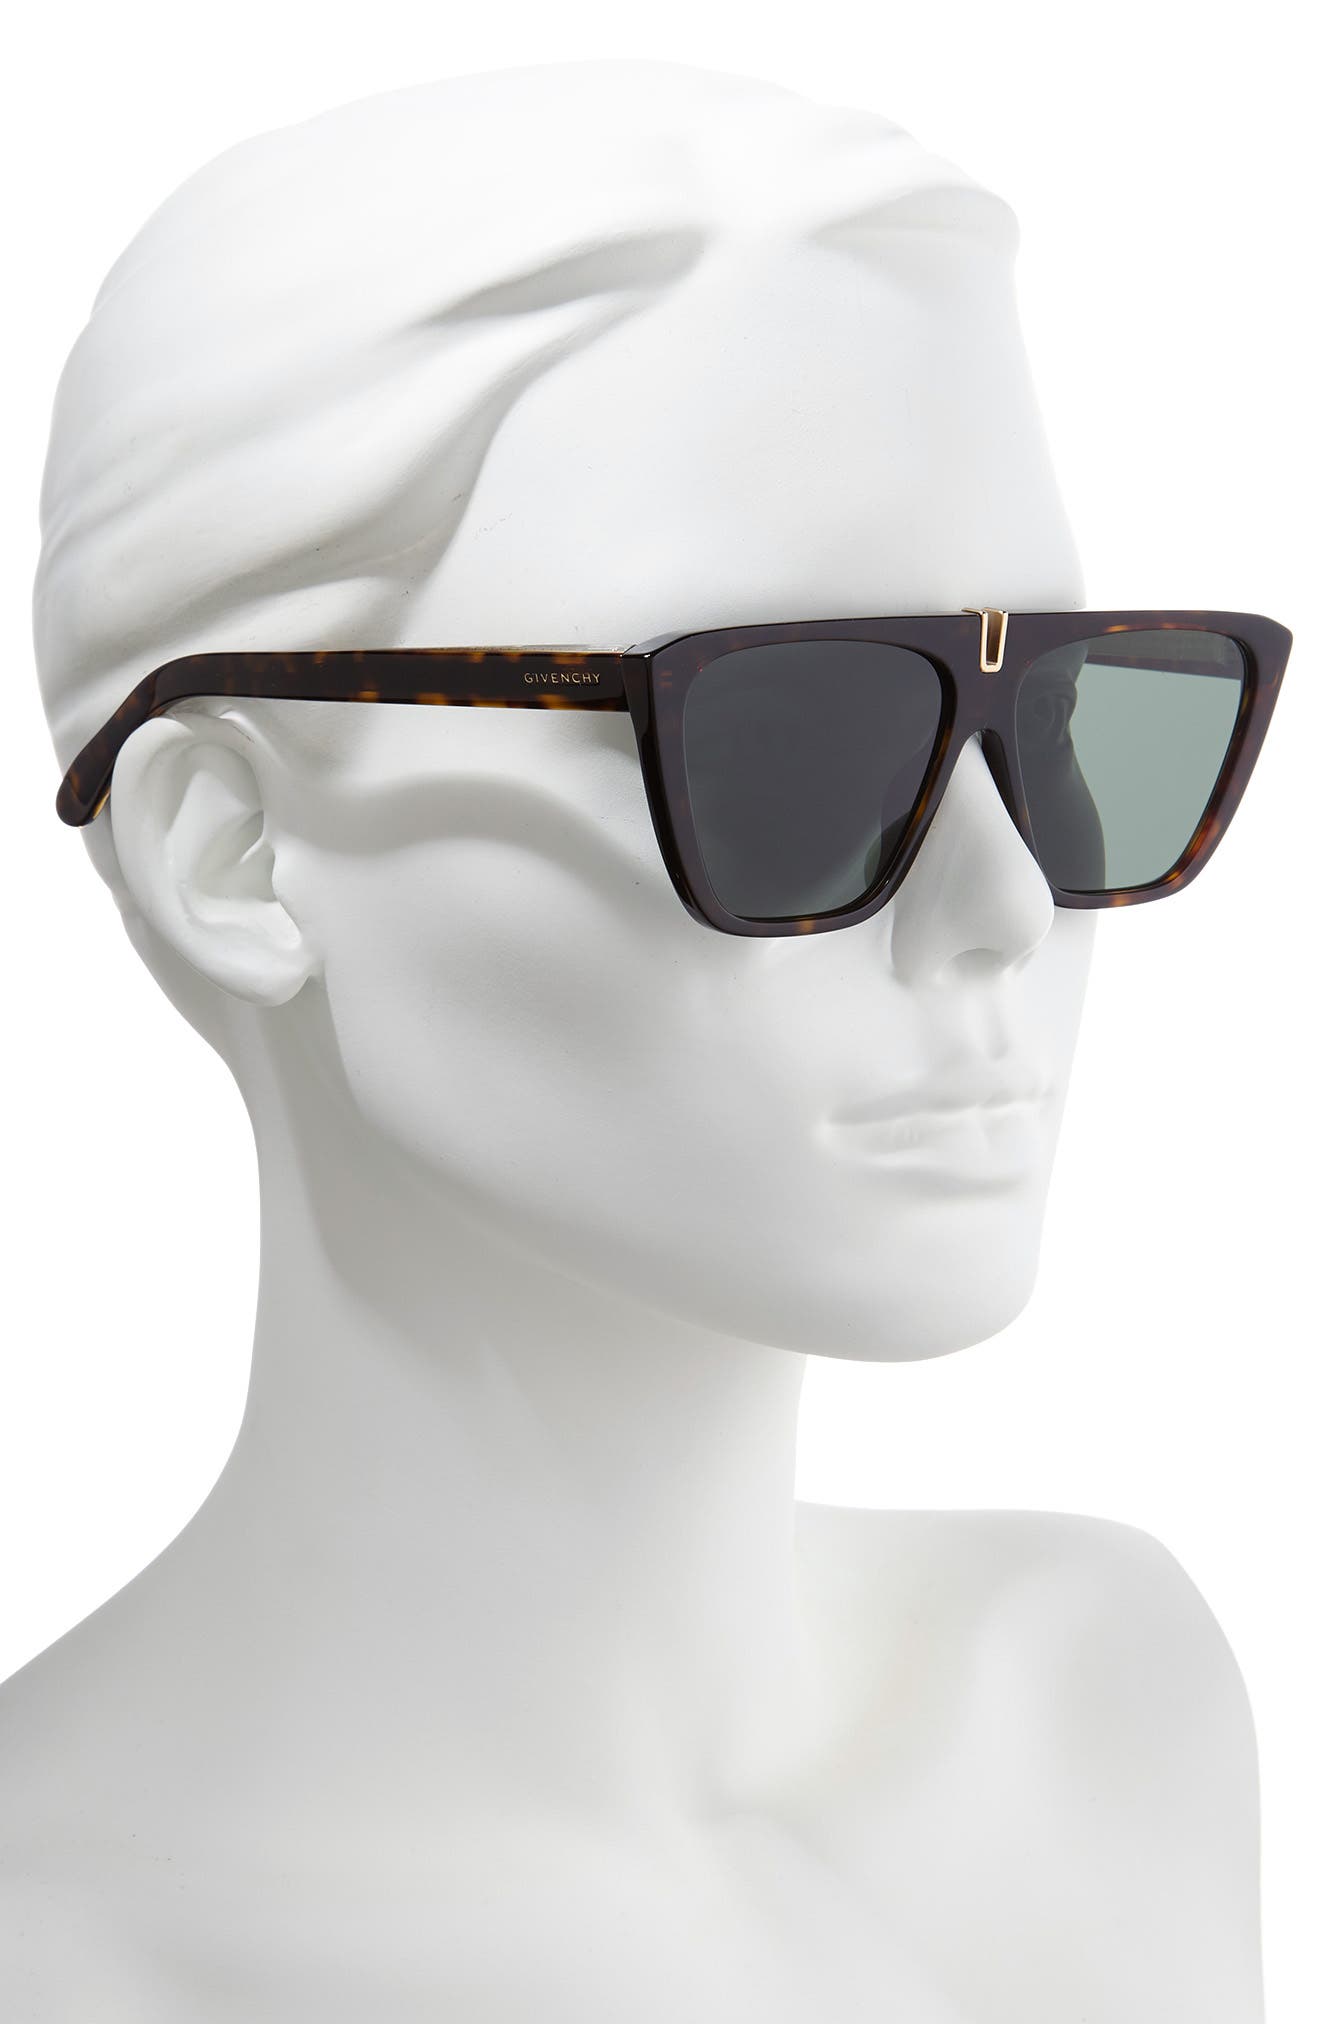 58mm flat top sunglasses givenchy